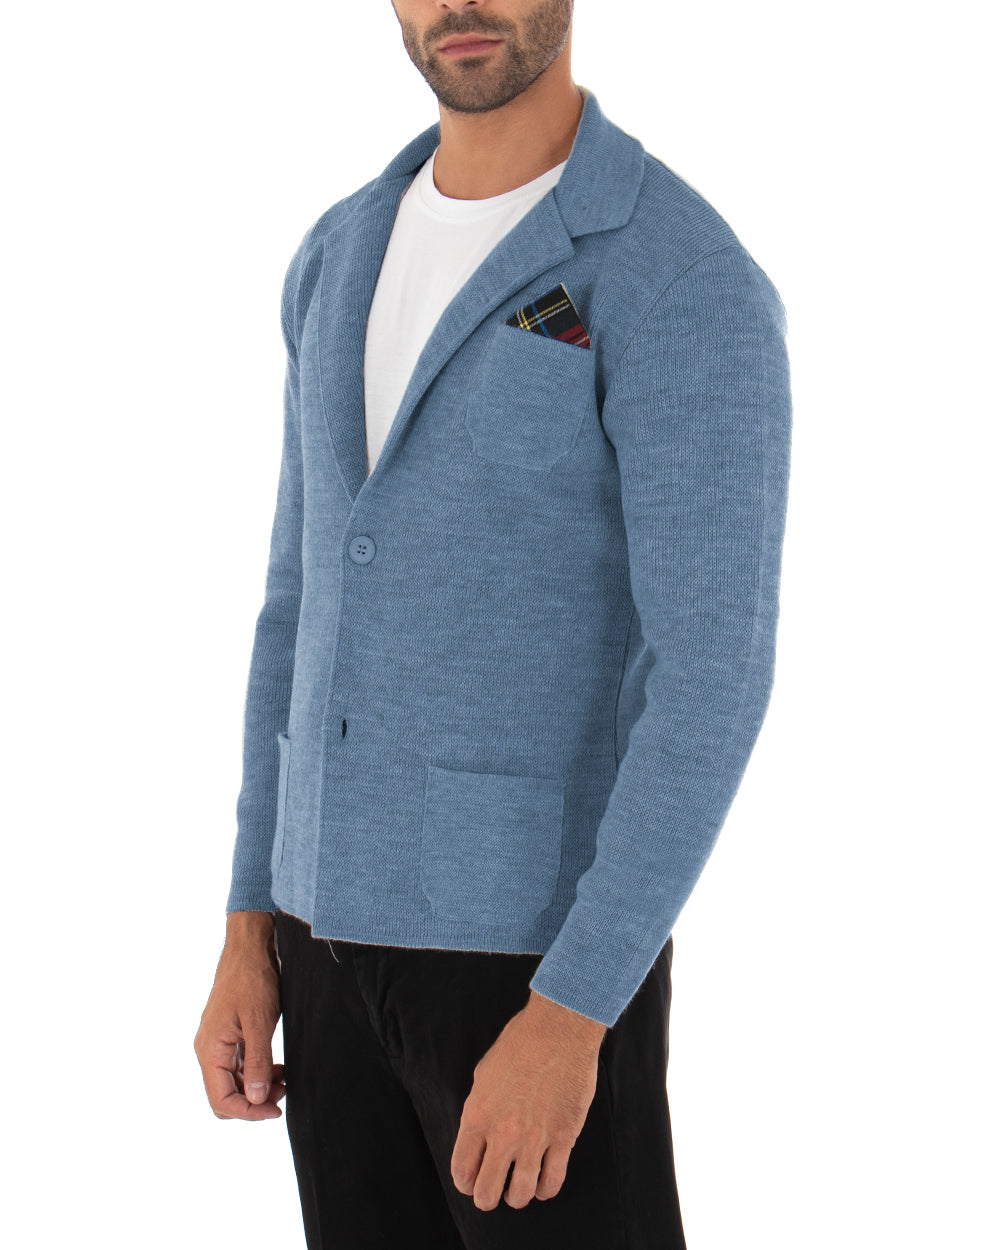 Men's Cardigan Jacket With Buttons Knit Sweater Solid Color Beige Casual GIOSAL-M2667A